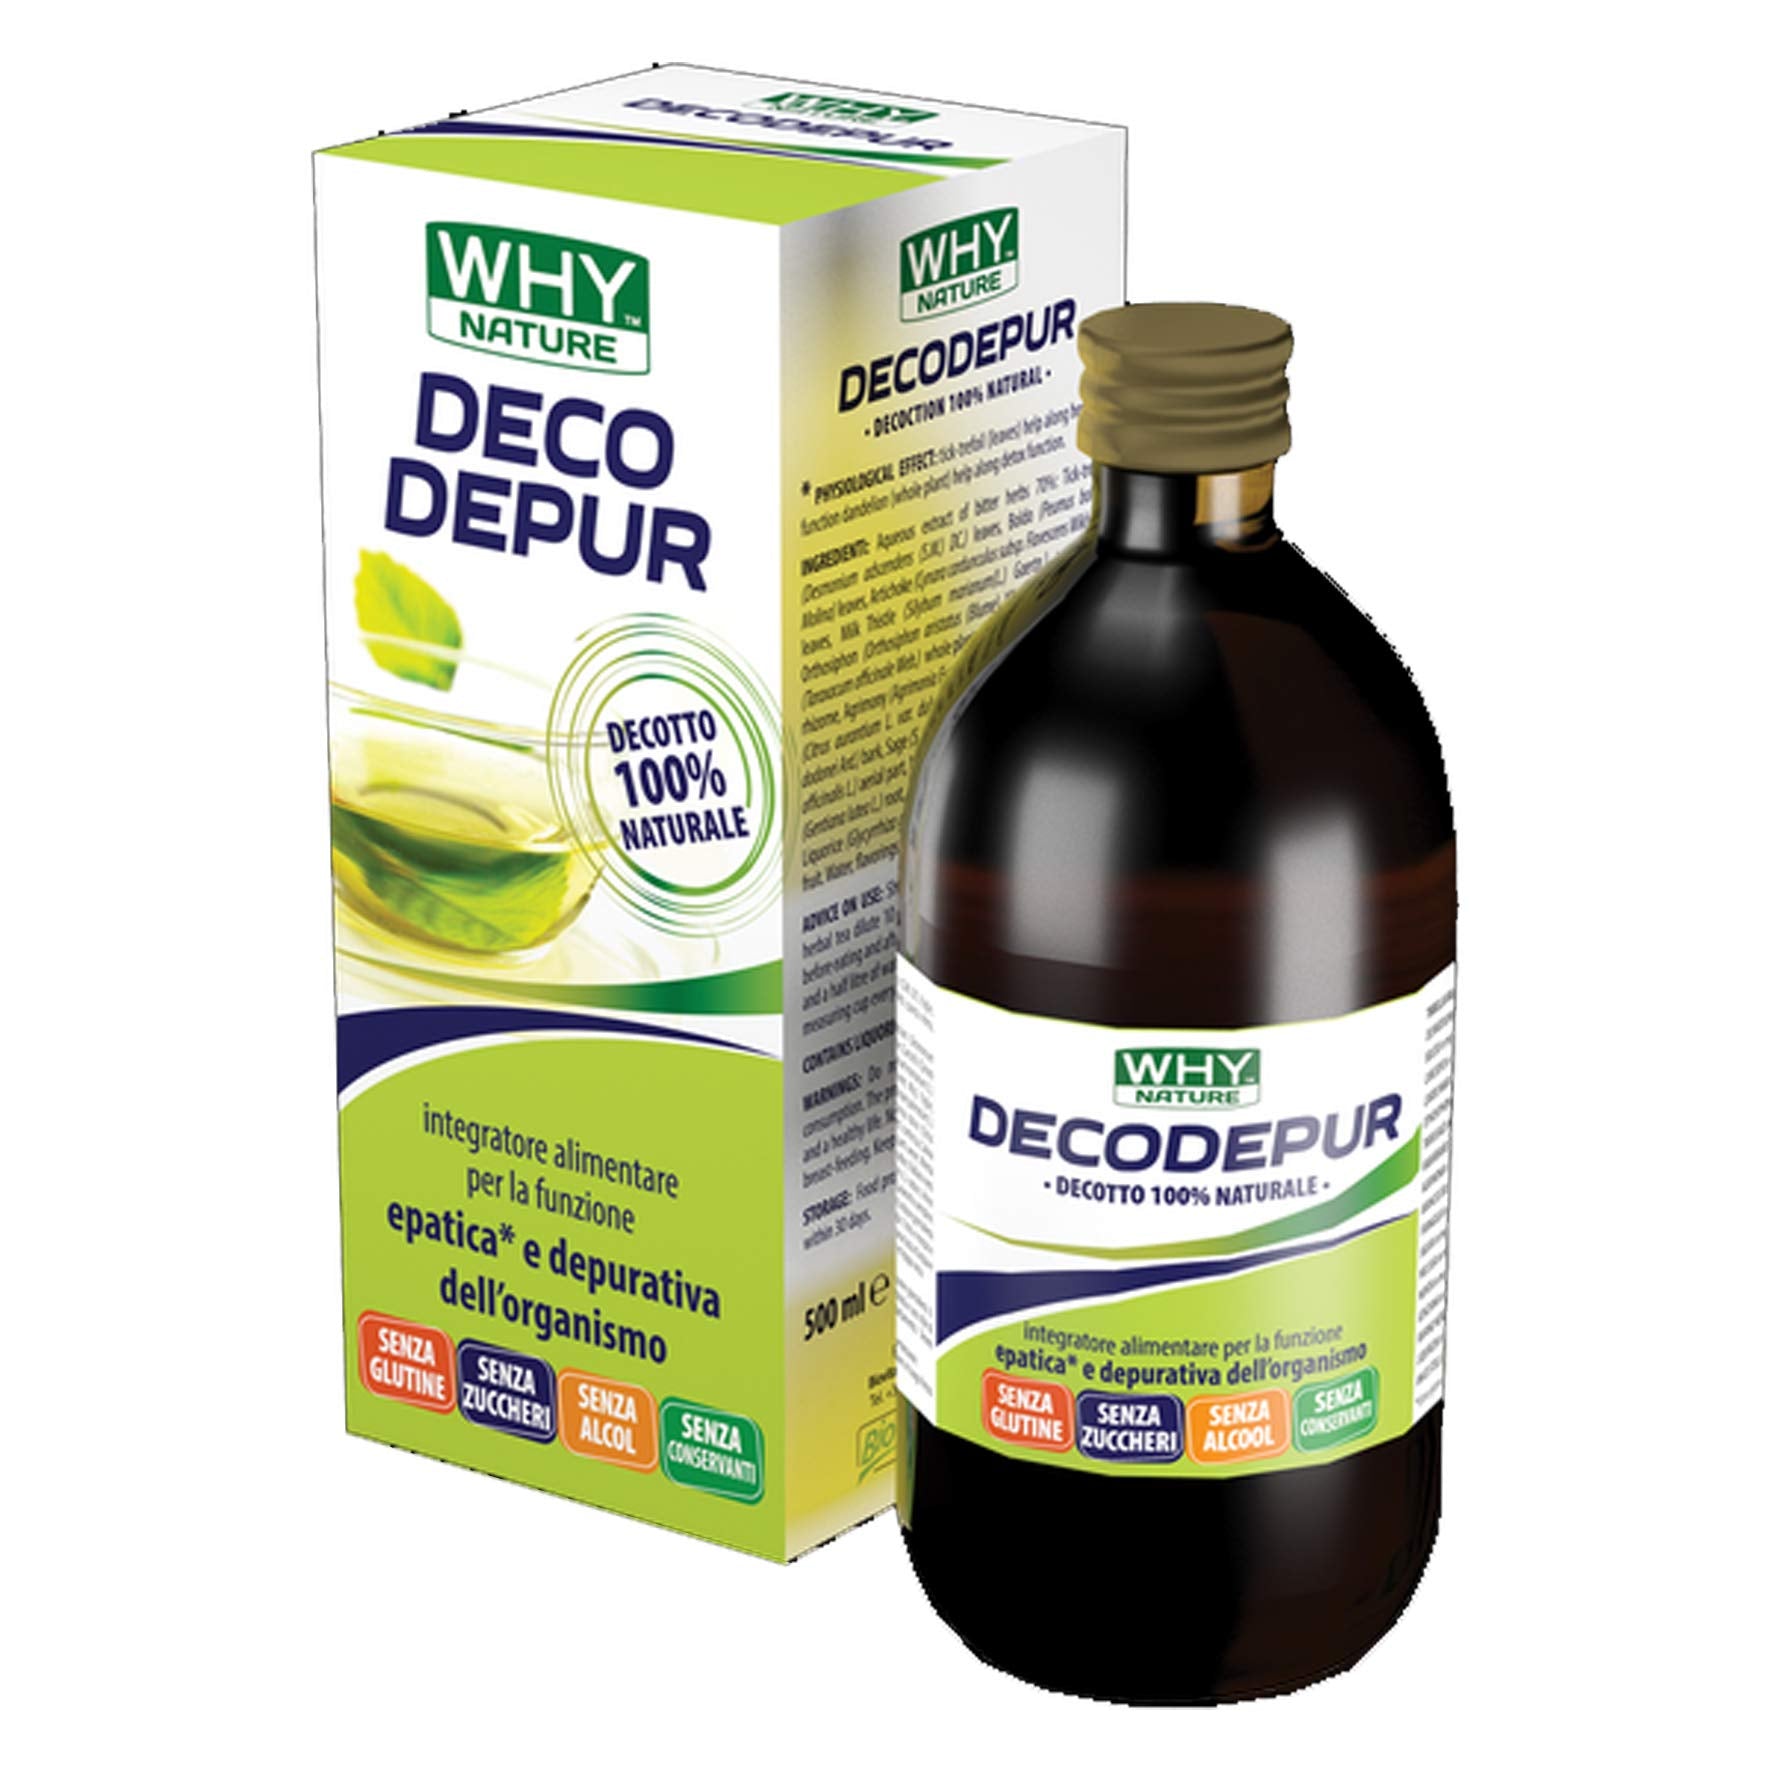 WHY NATURE Deco Depur- for the purifying function of the body